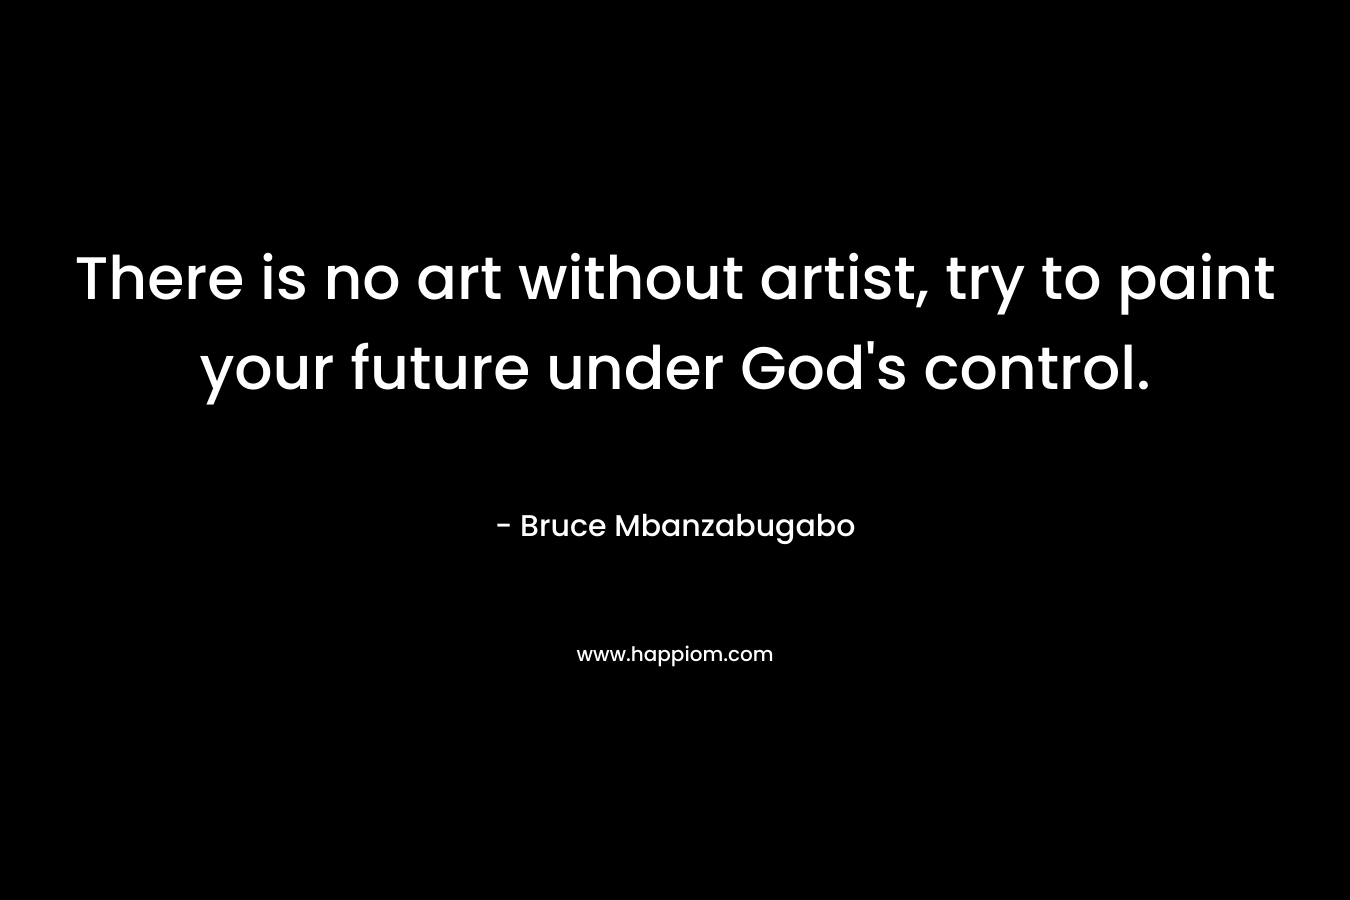 There is no art without artist, try to paint your future under God’s control. – Bruce Mbanzabugabo